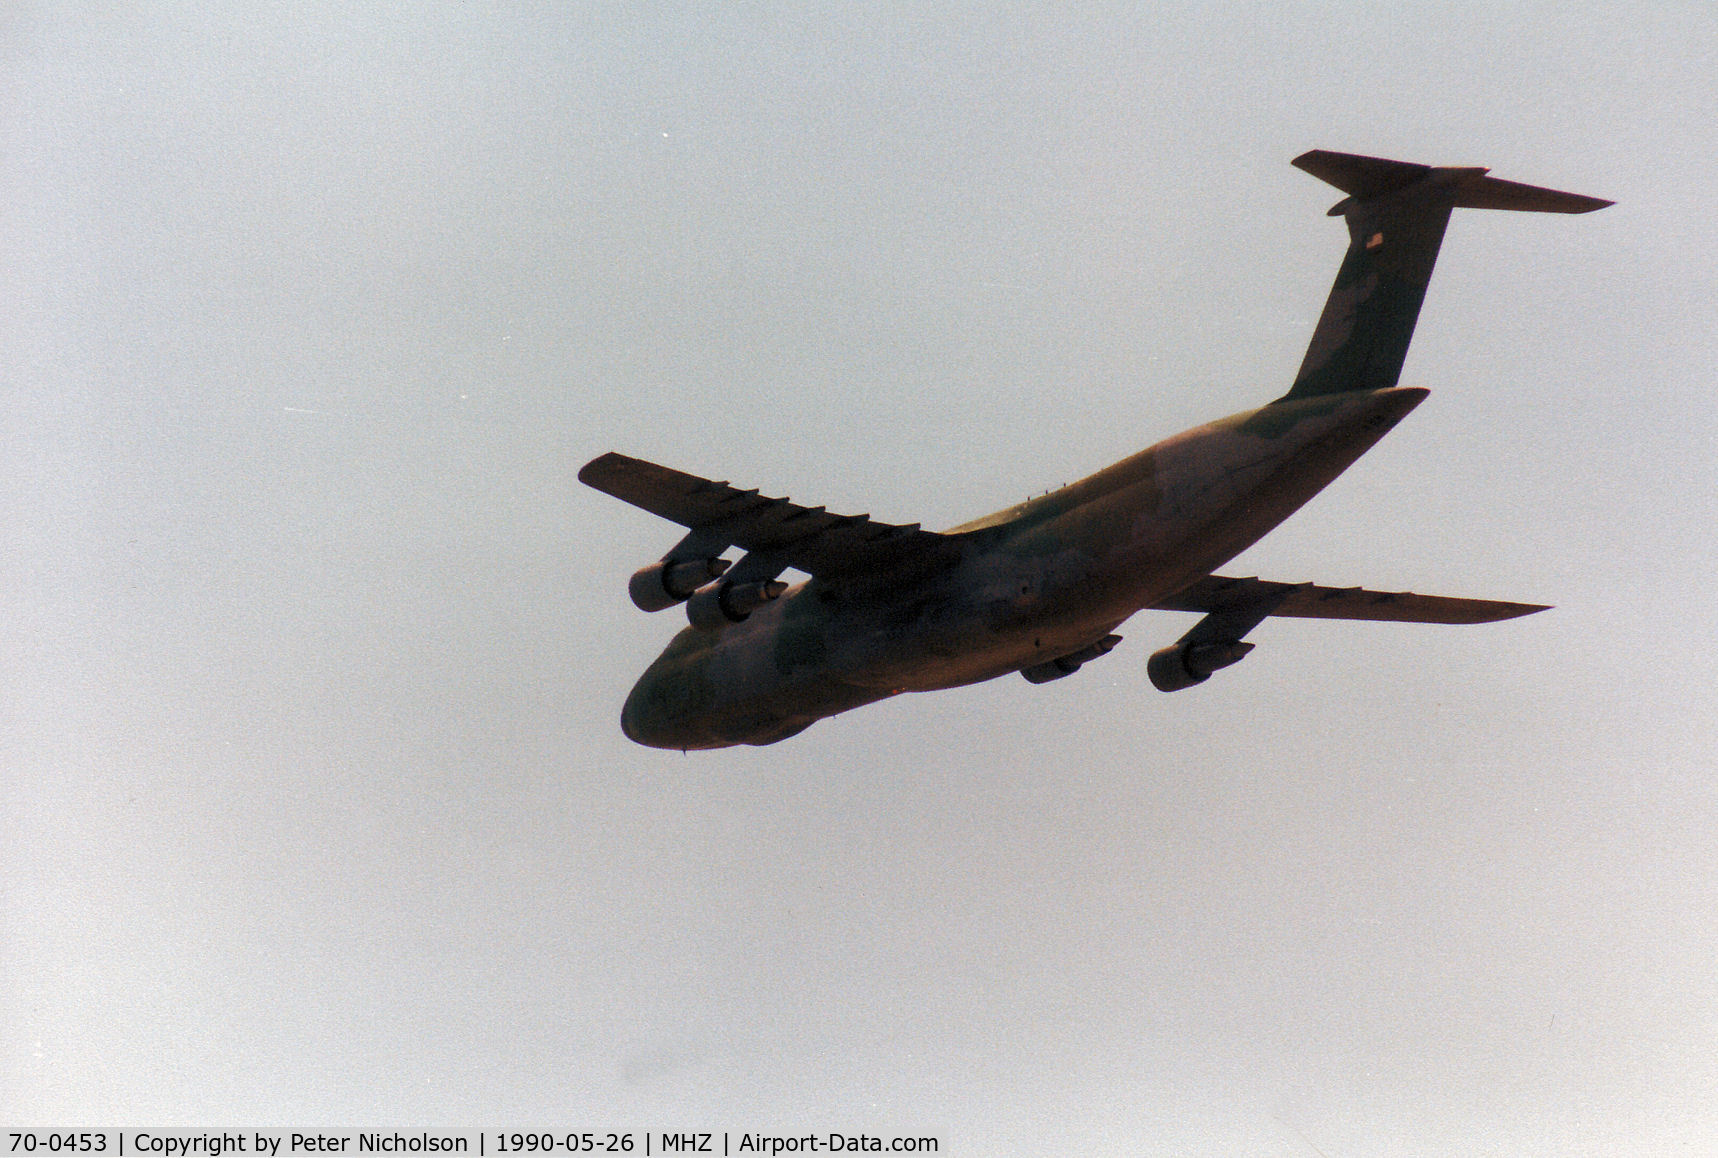 70-0453, 1970 Lockheed C-5A Galaxy C/N 500-0067, C-5A Galaxy of 436th Military Airlift Wing at Dover AFB on a fly-past at the 1990 RAF Mildenhall Air Fete.